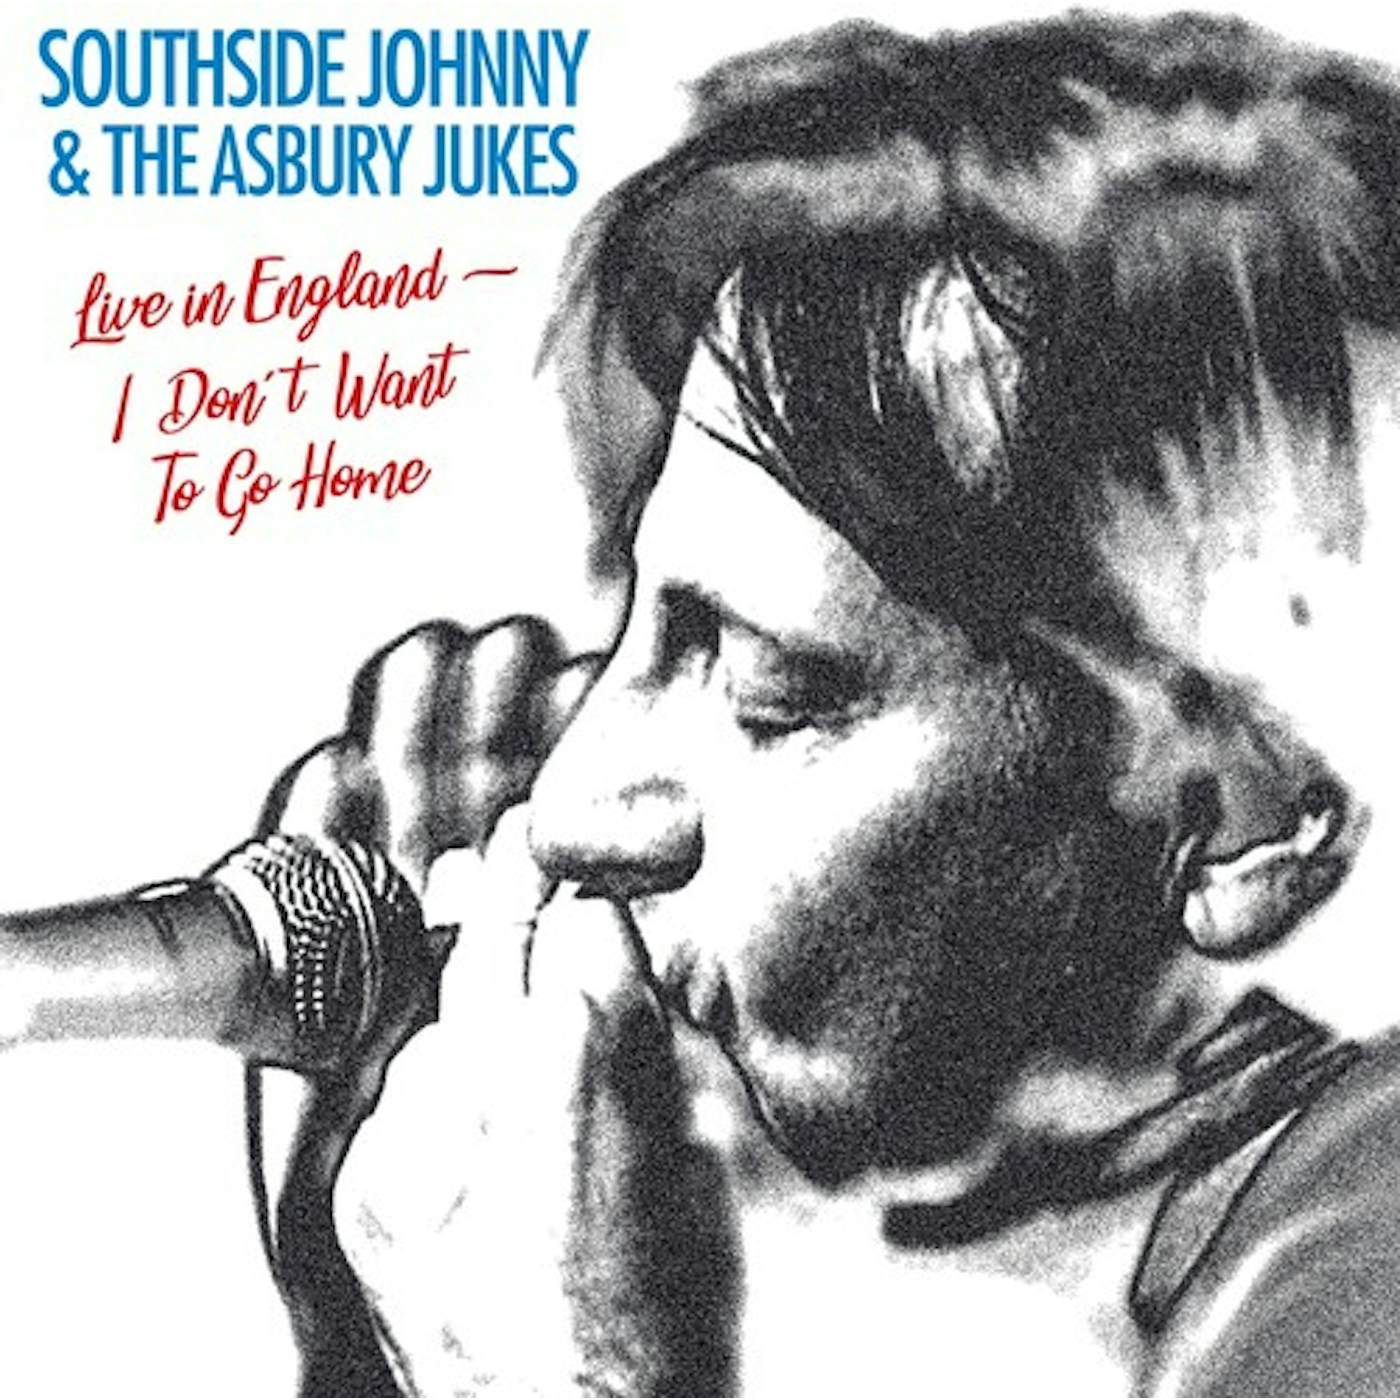 Southside Johnny And The Asbury Jukes I DON'T WANNA GO HOME: LIVE Vinyl Record